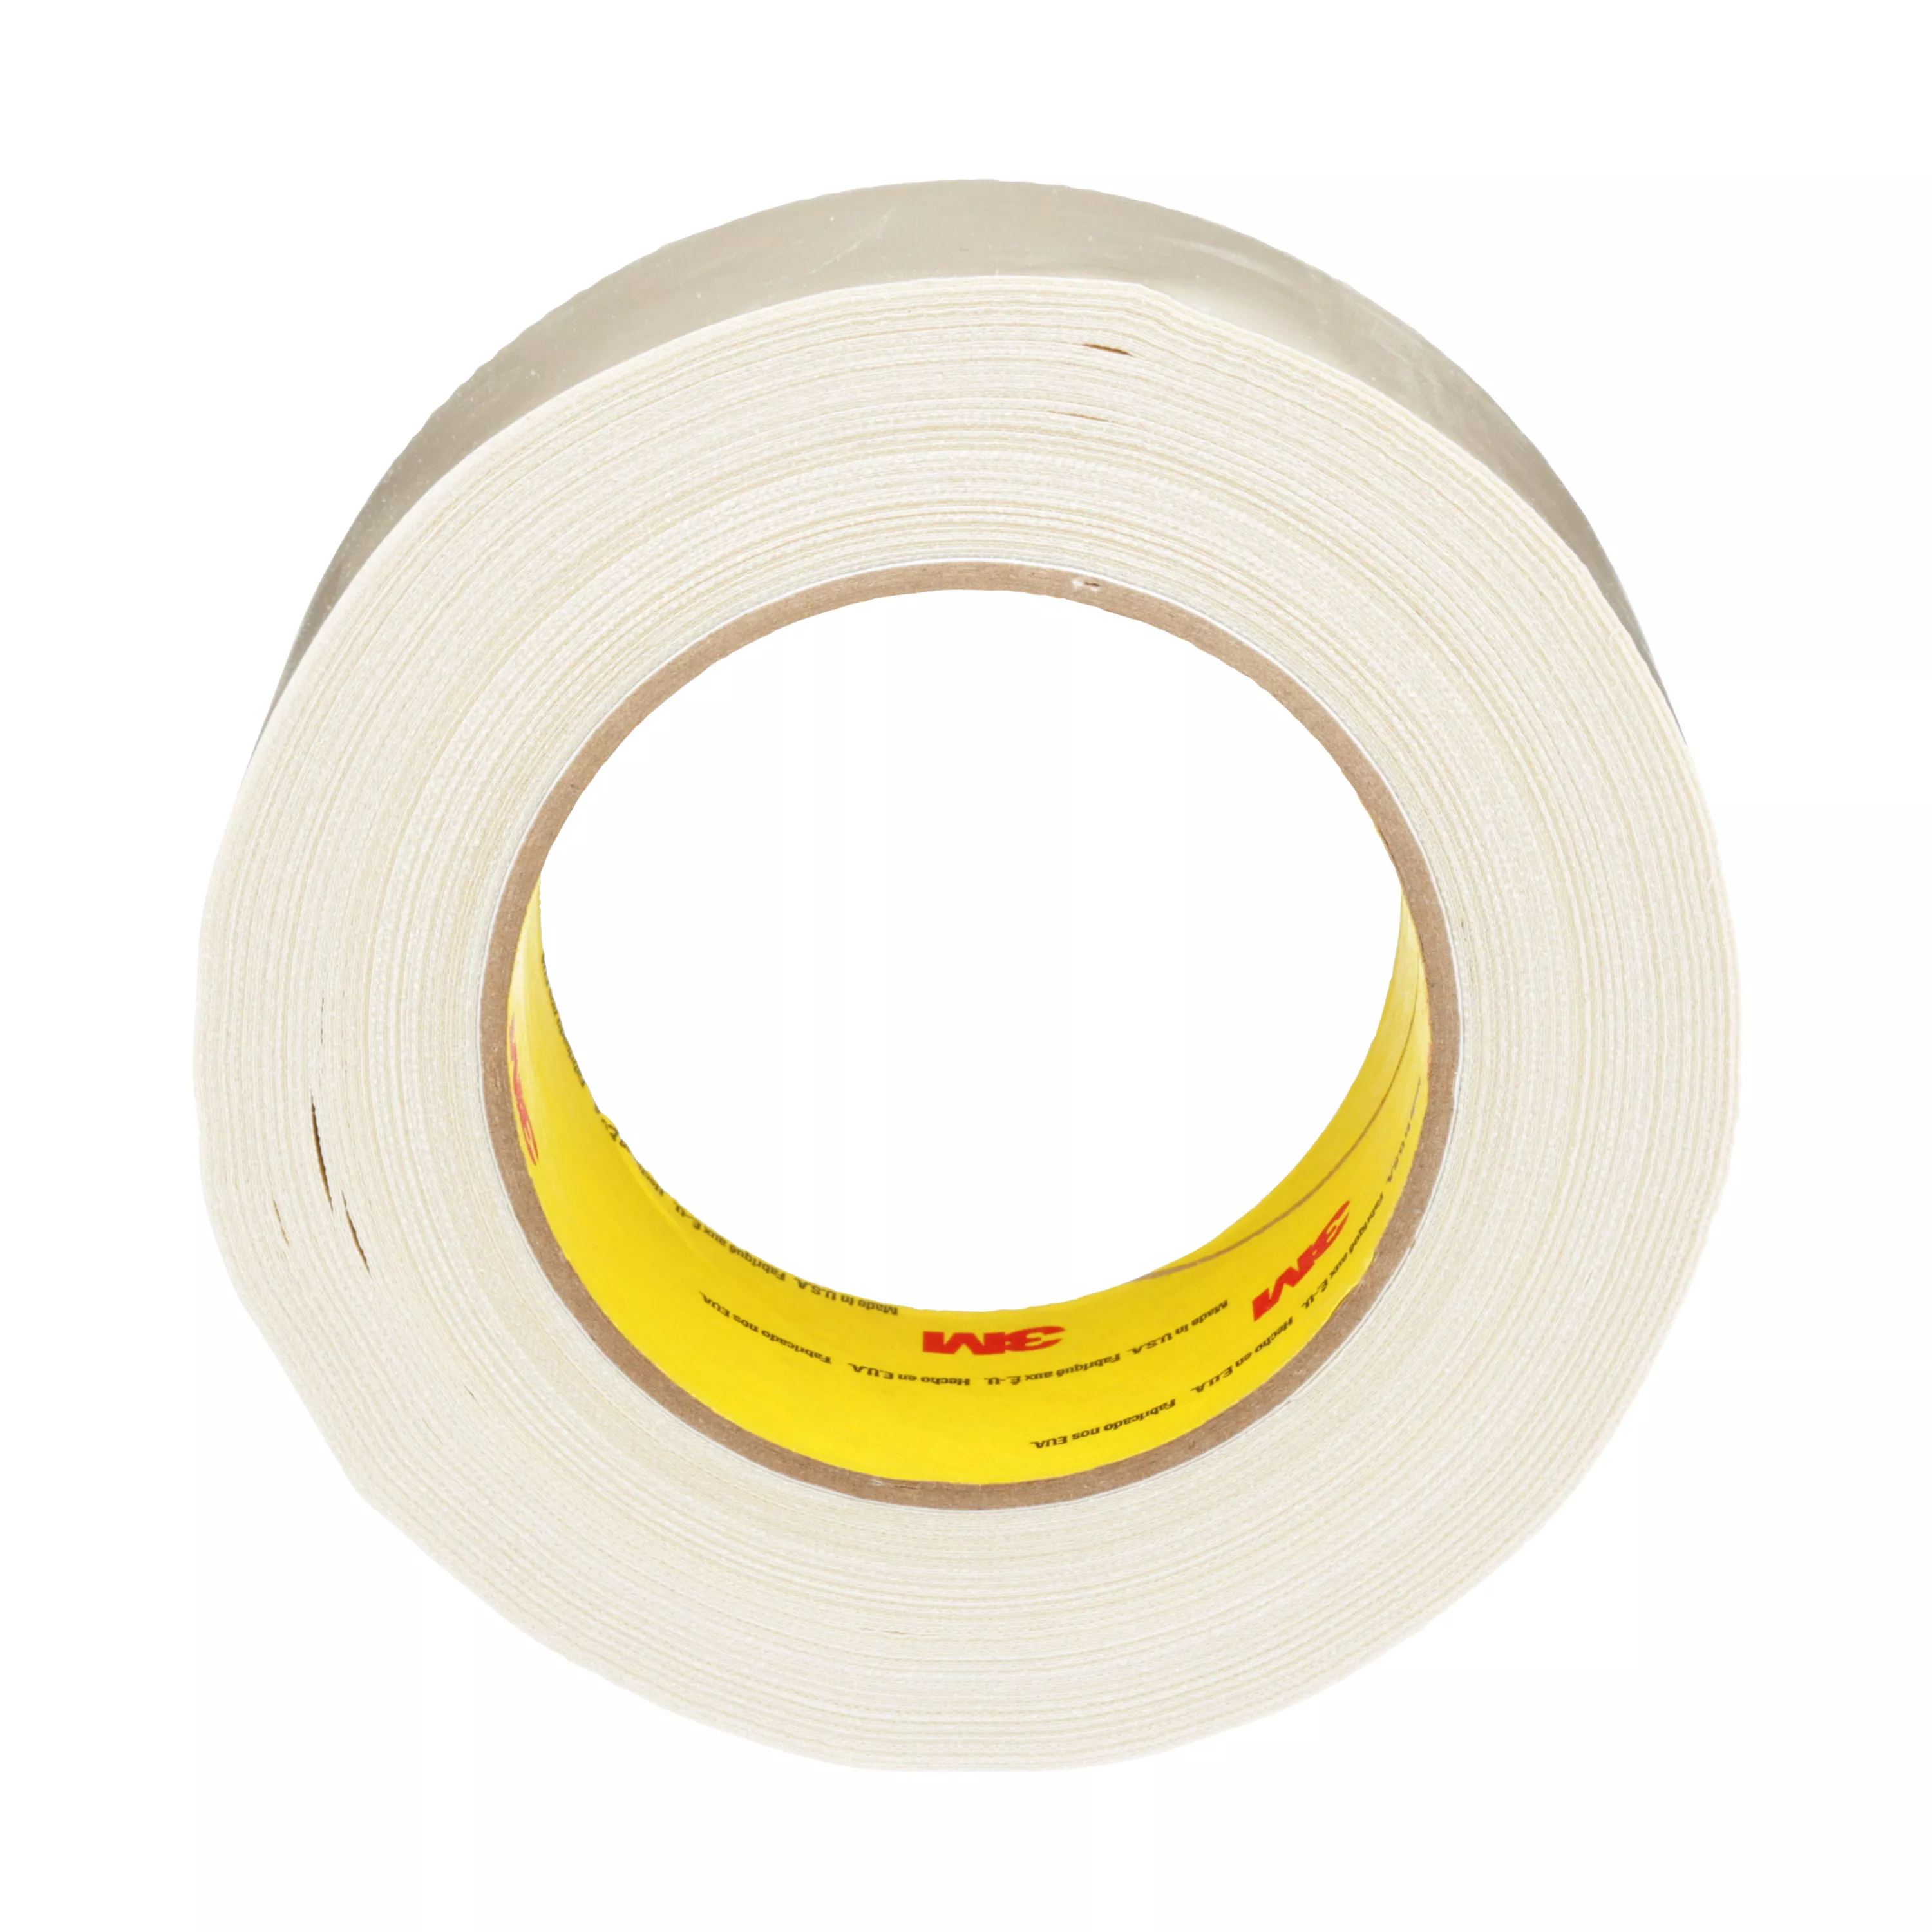 SKU 7000124289 | 3M™ Traction Tape 5401